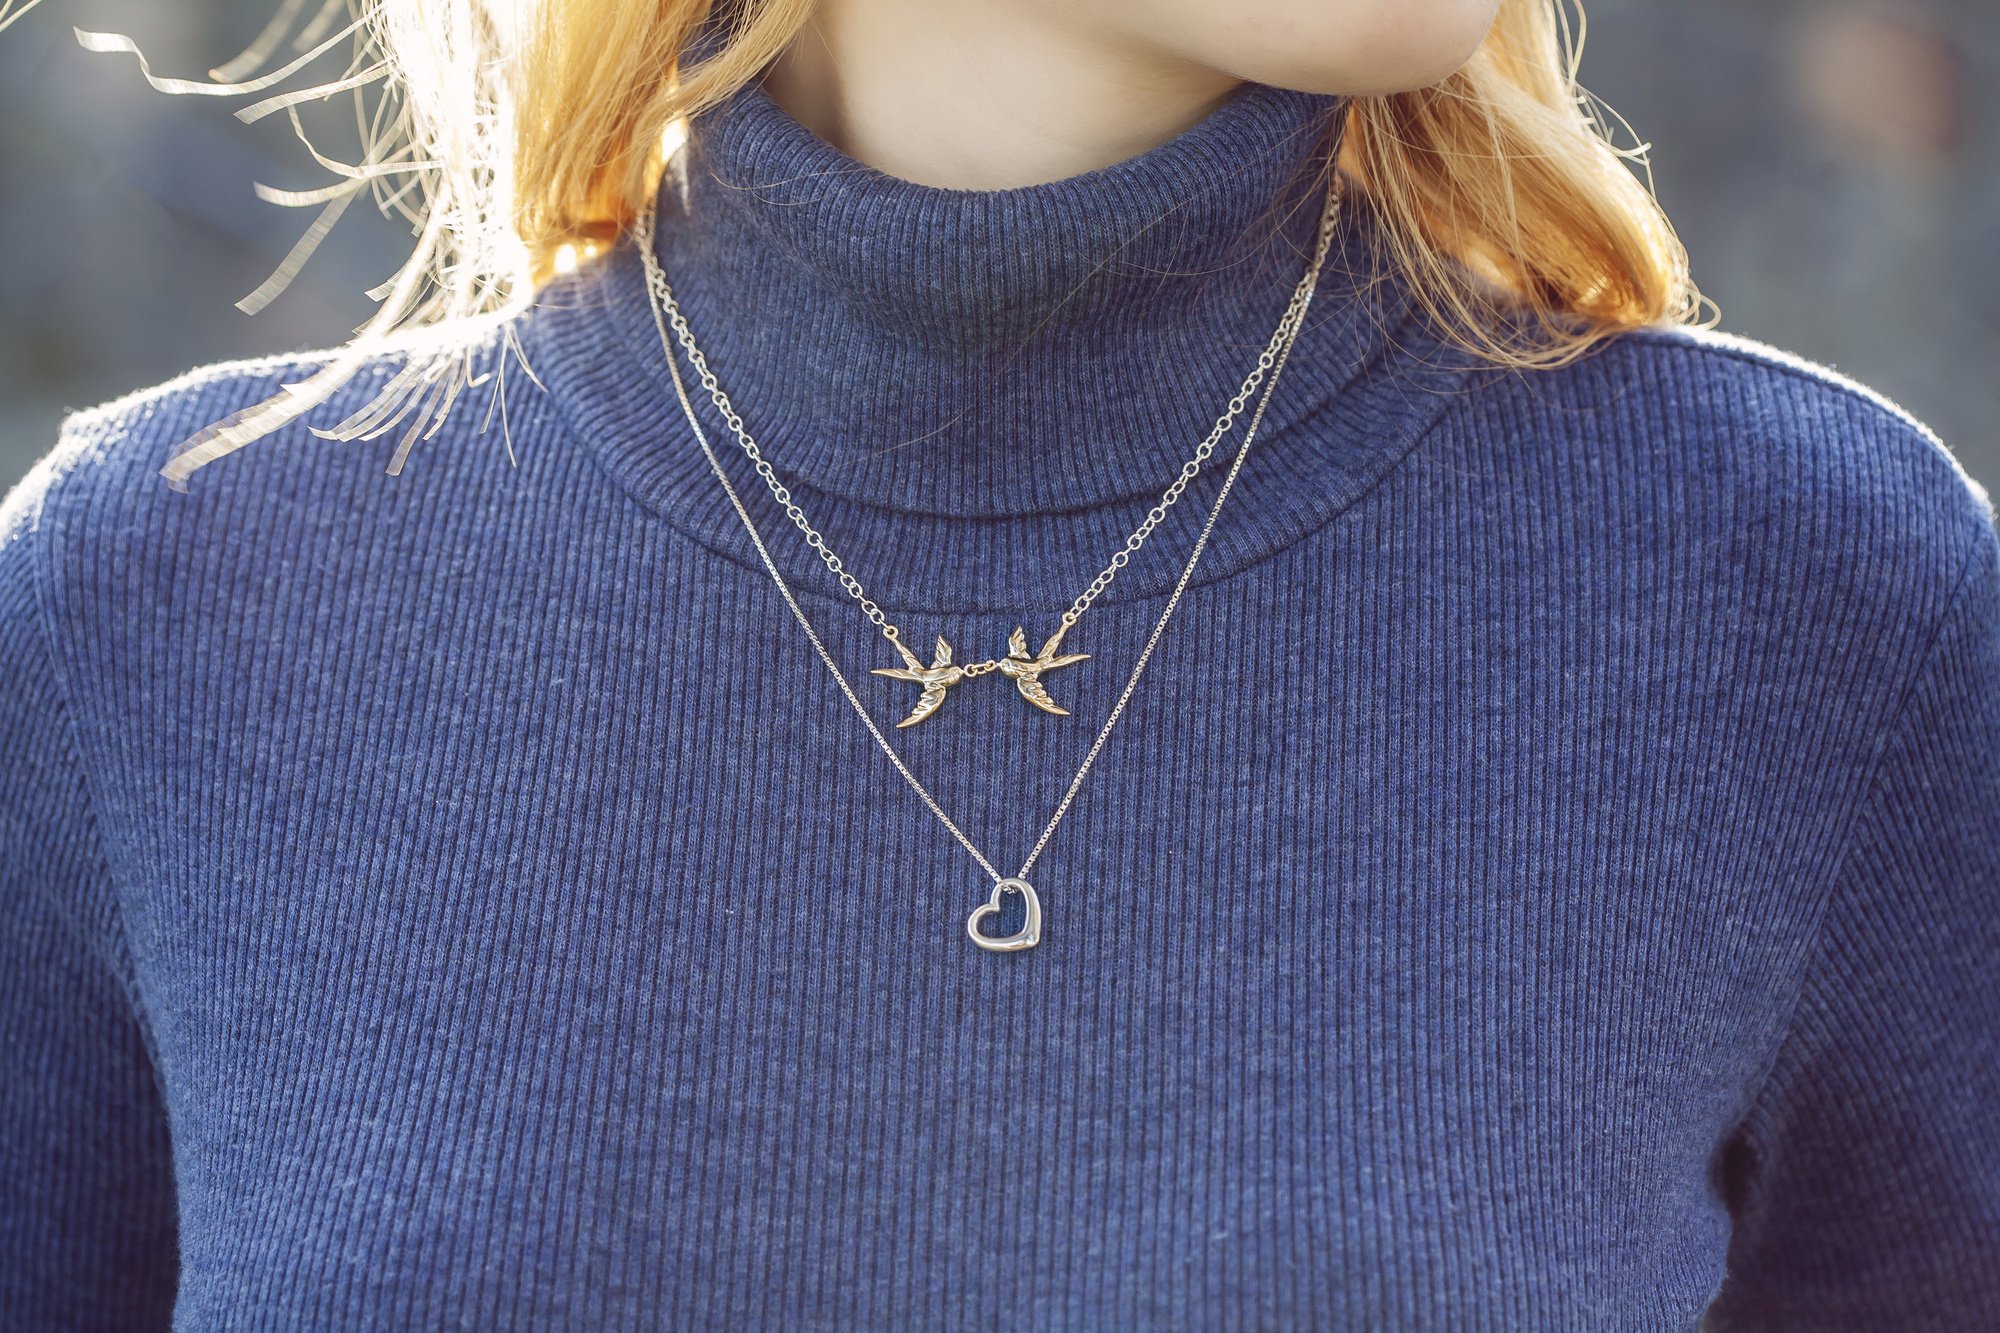 The long necklace: how should you wear yours? - The Blog of